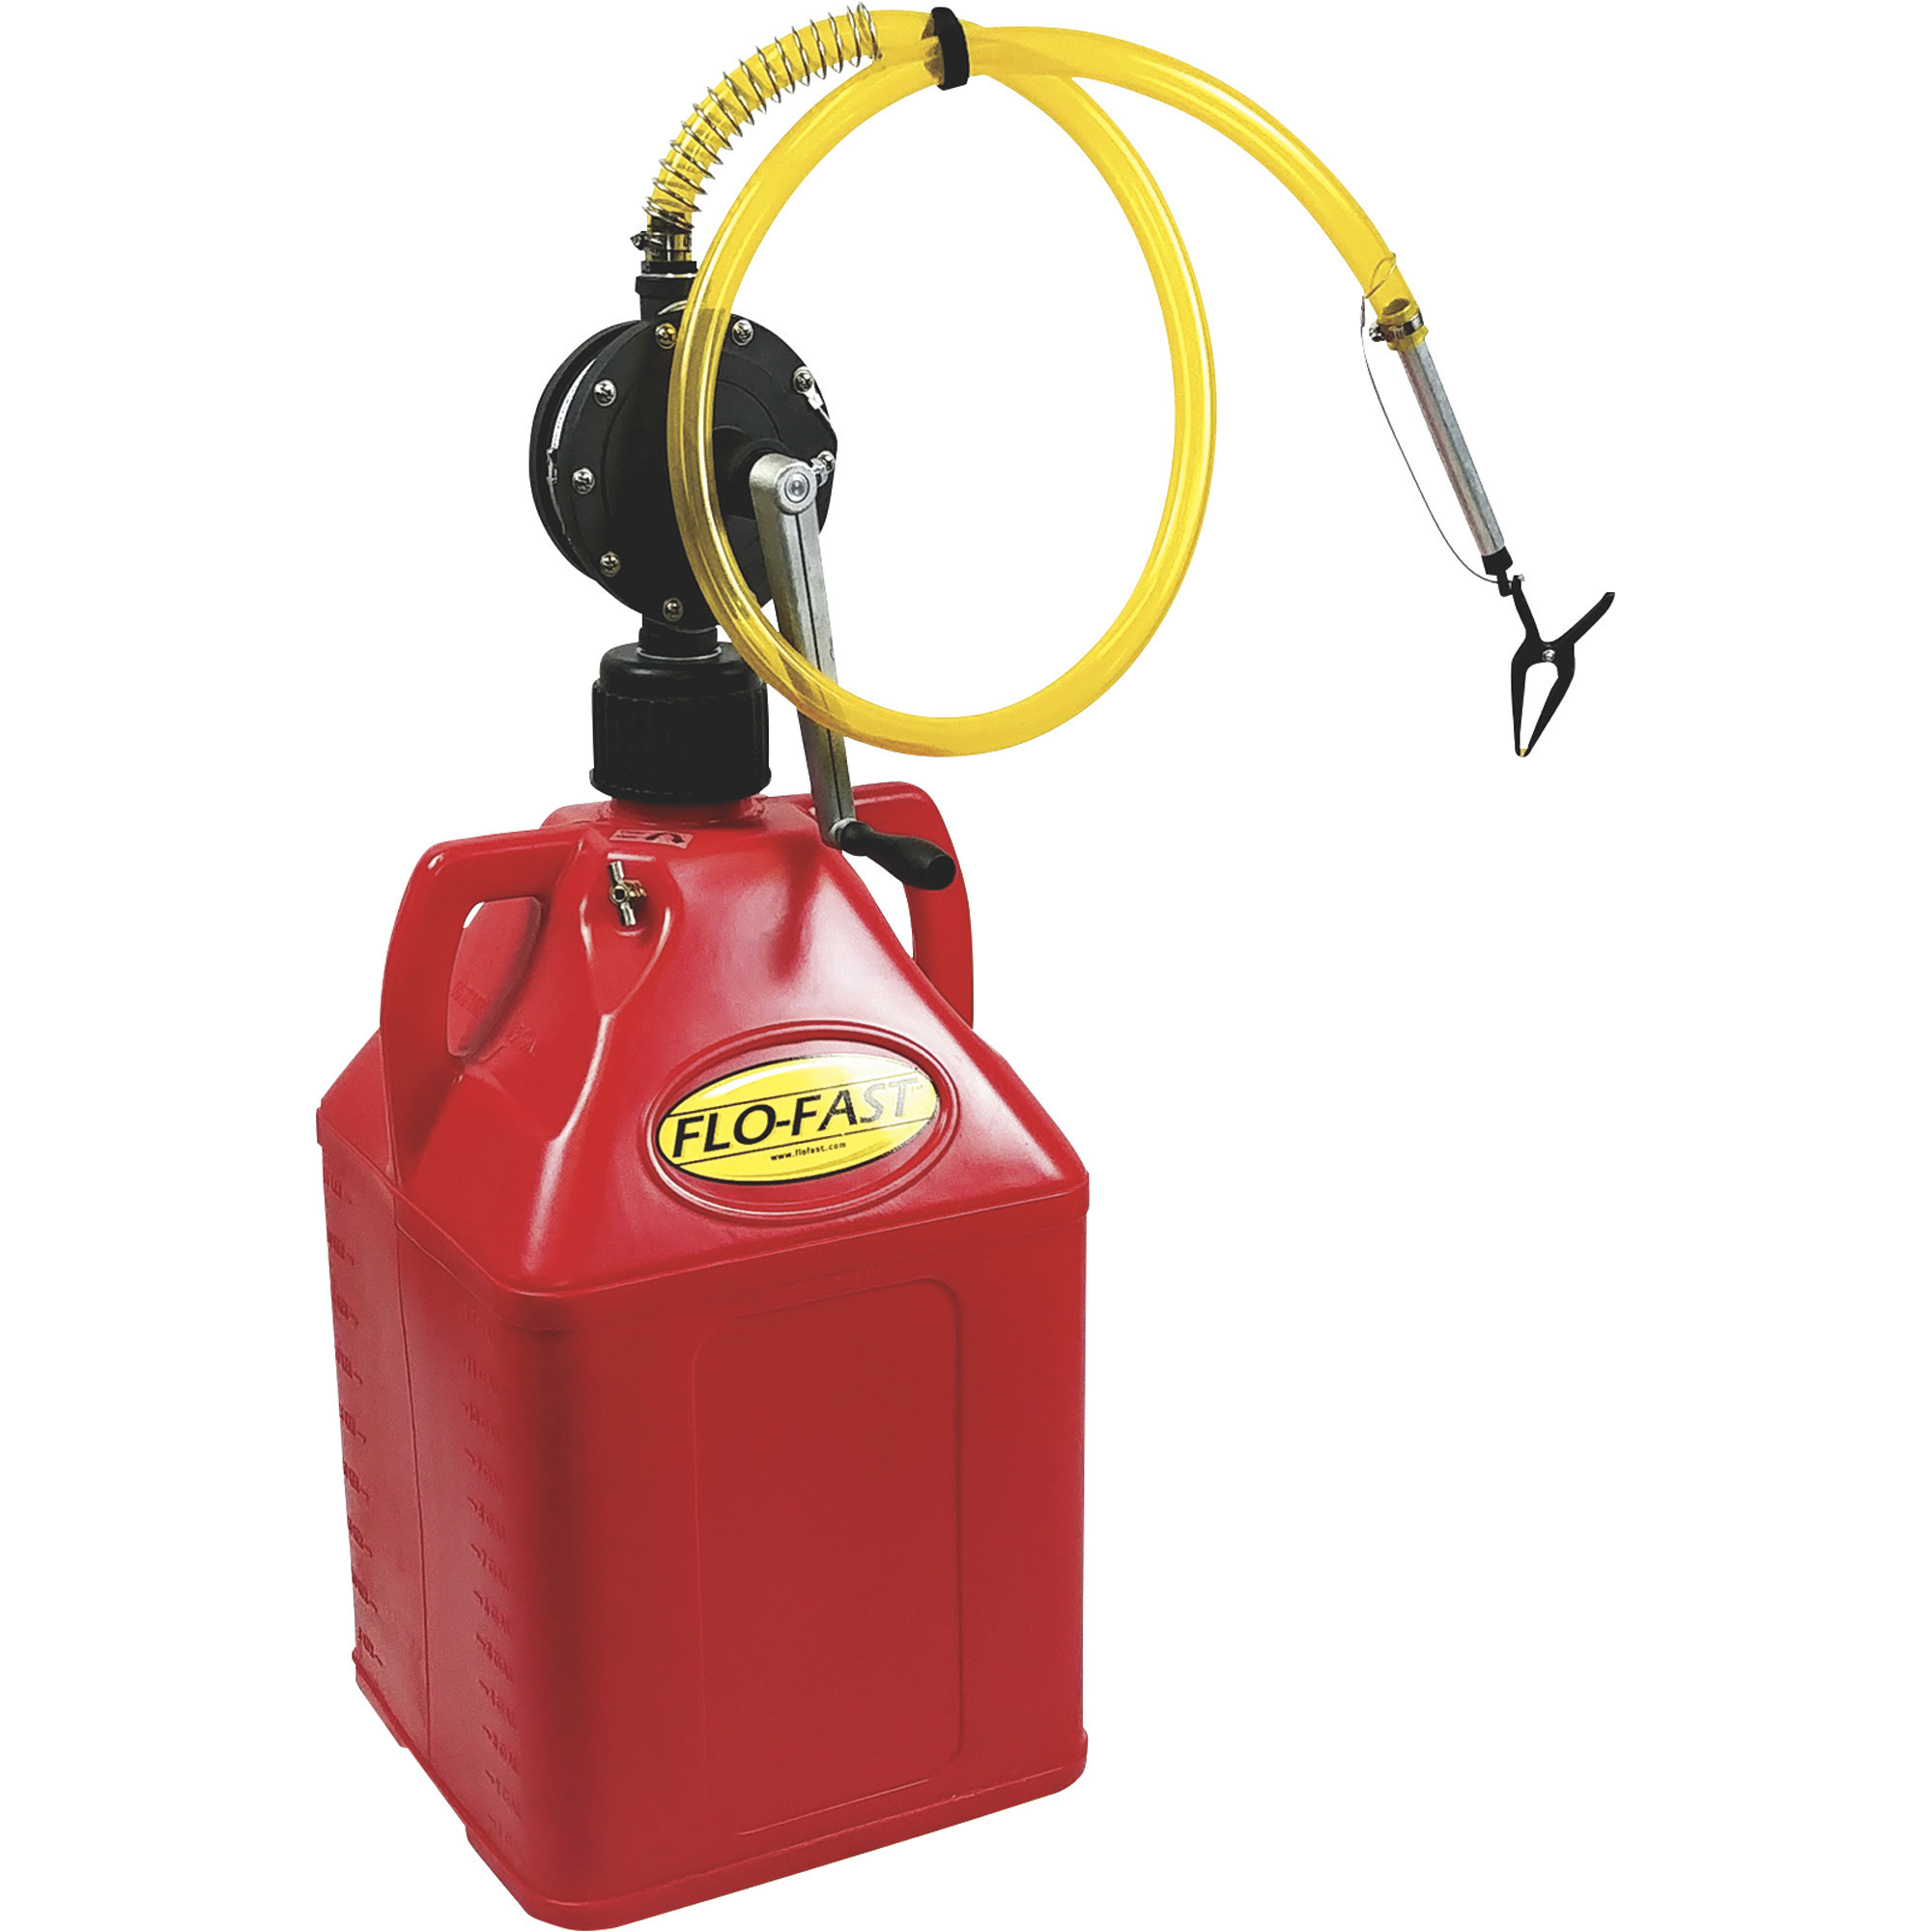 FLO-FAST Container With Pump, 15-Gallon, Red, For Gasoline, Model 31005-R